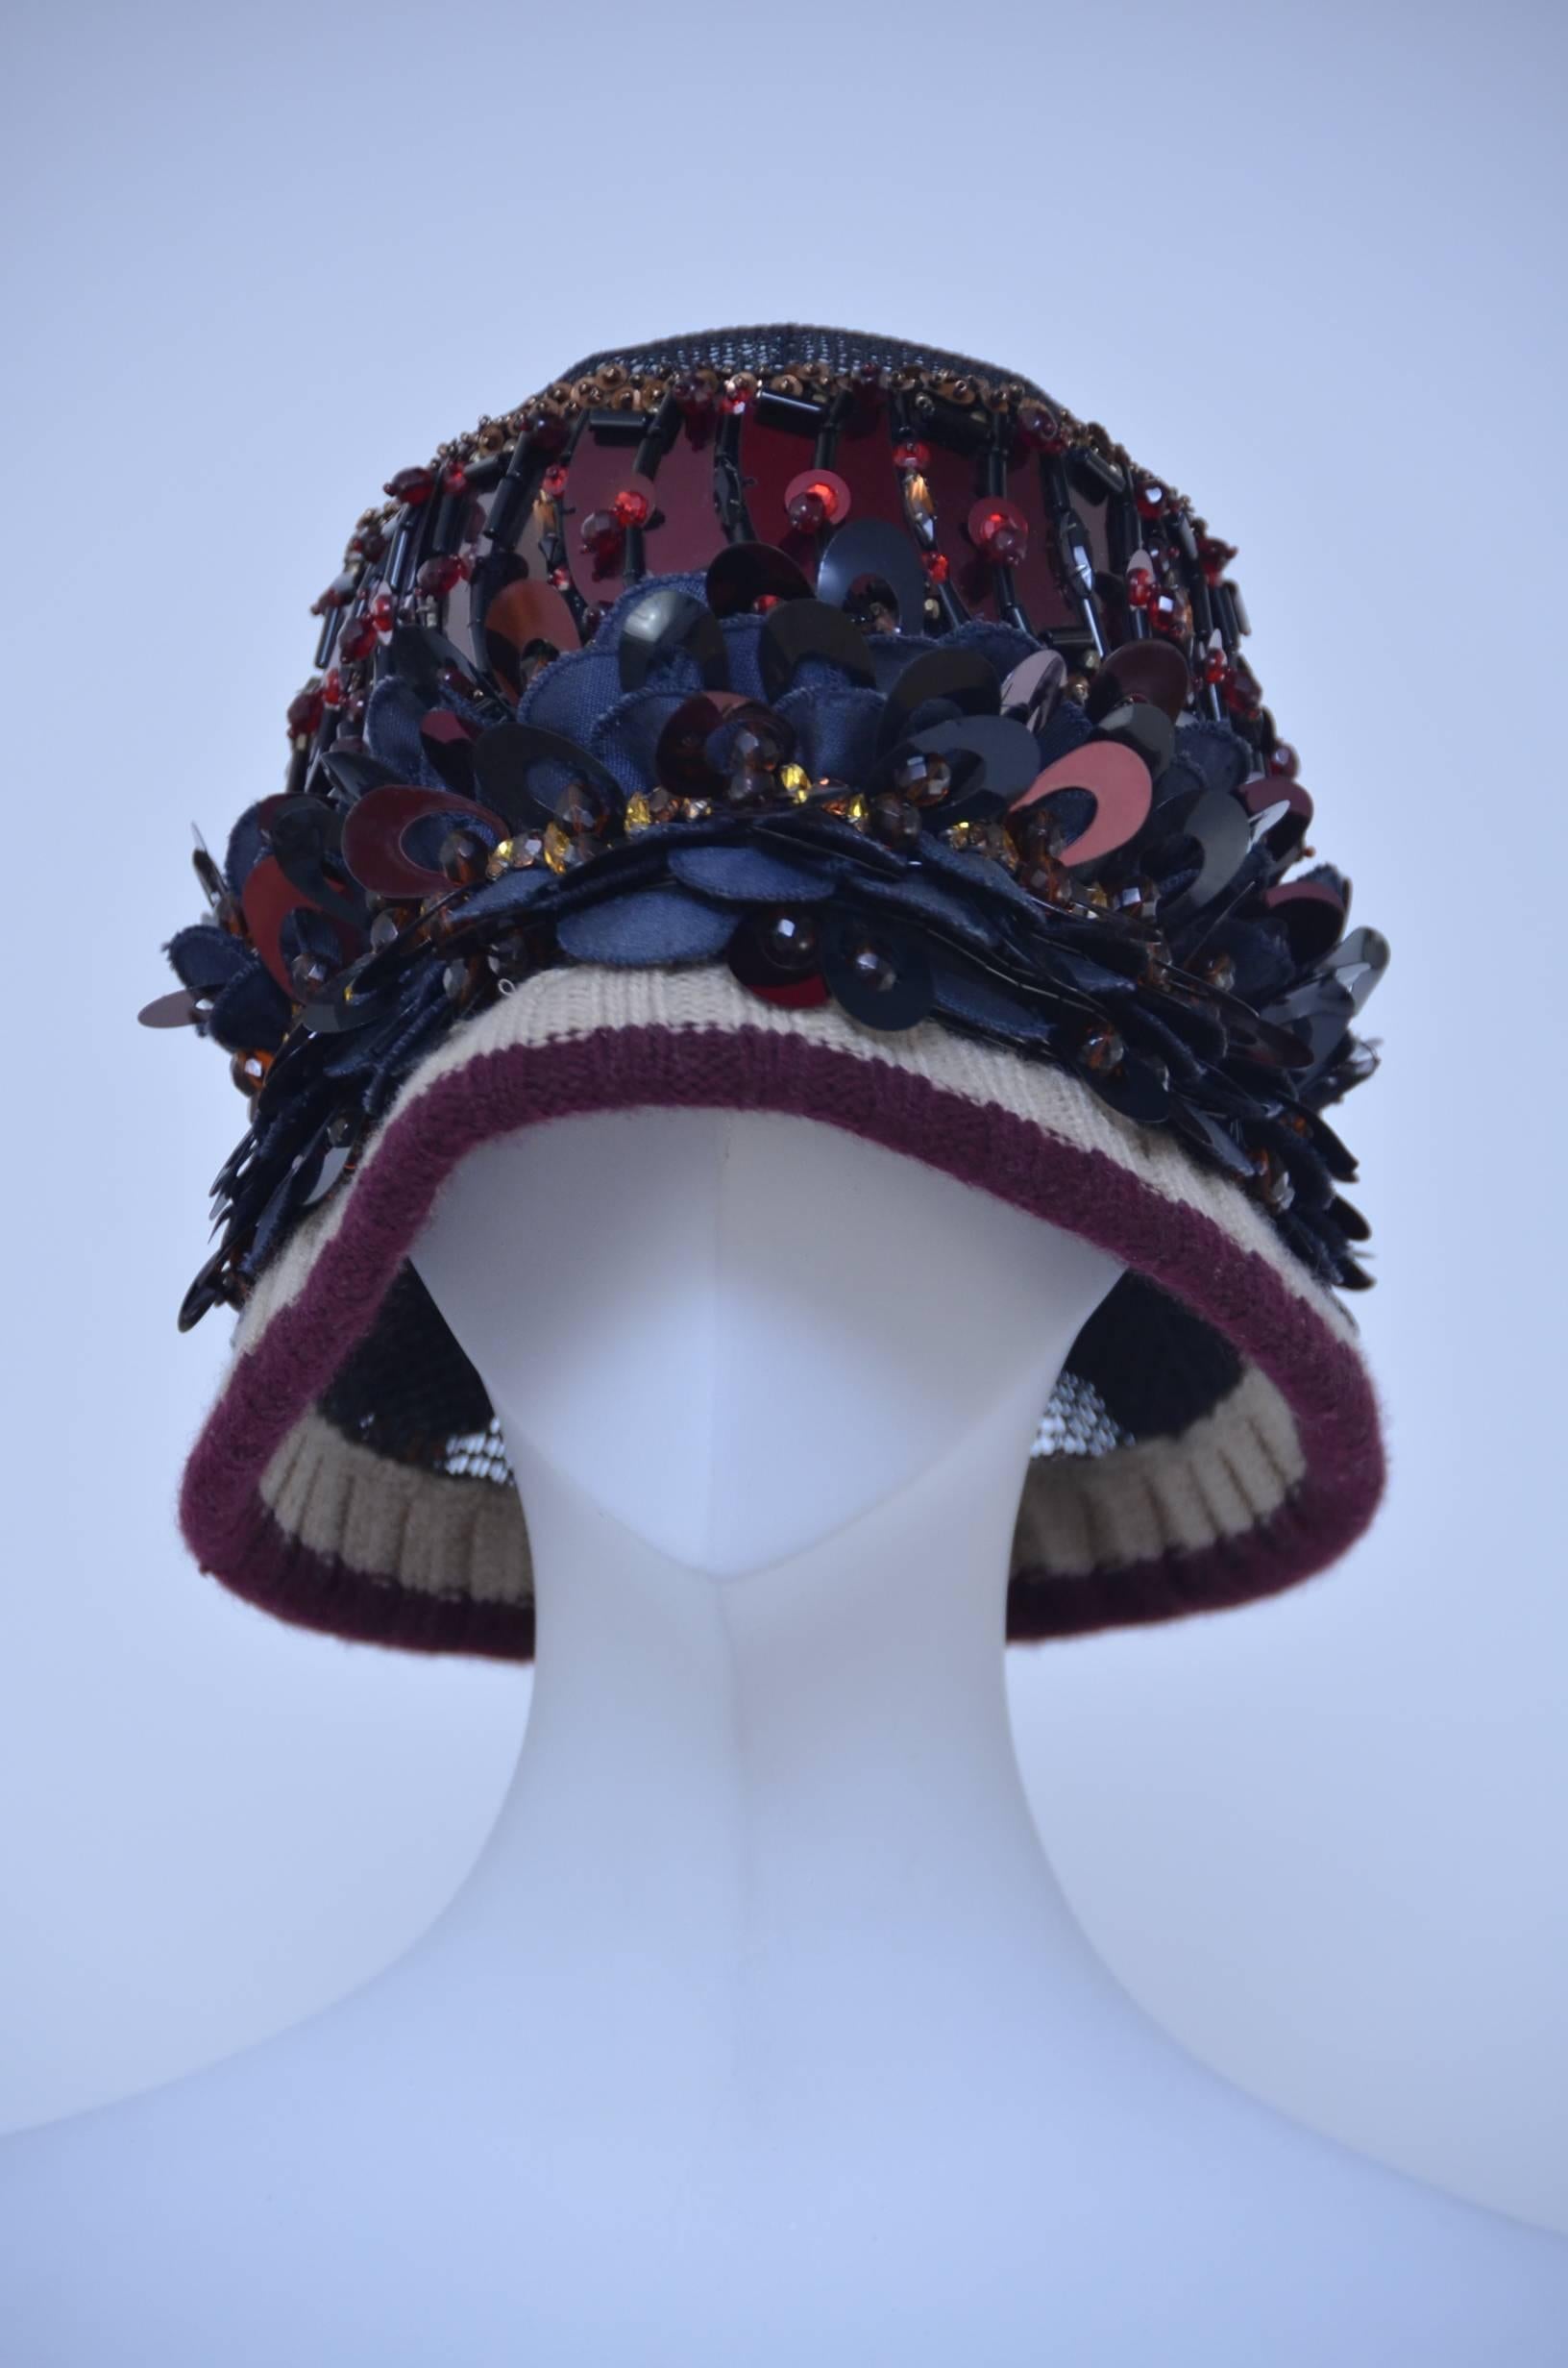 Prada embellished cloche hat.
Numbered 187.
2005 collection.
Bottom of the hat has wire inside the fabric to support the wear and shape.
Excellent mint condition.
Made in Italy.

FINAL SALE.
